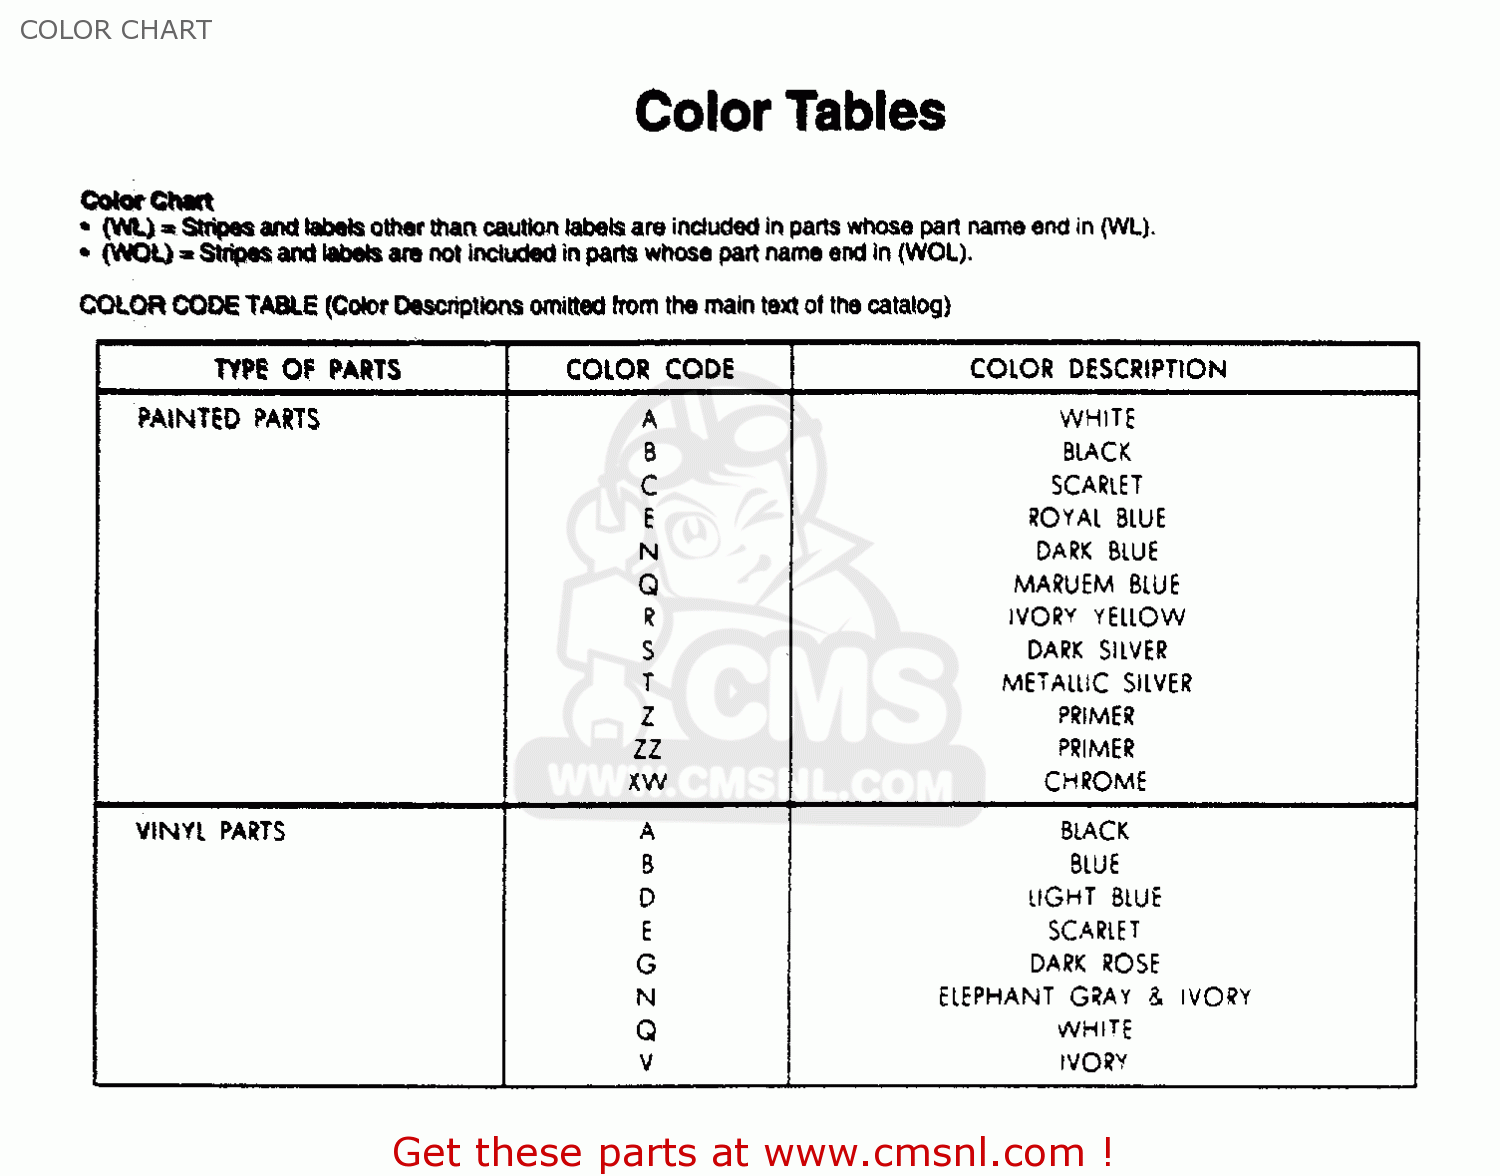 Paint Colors For Motorcycles Color Chart